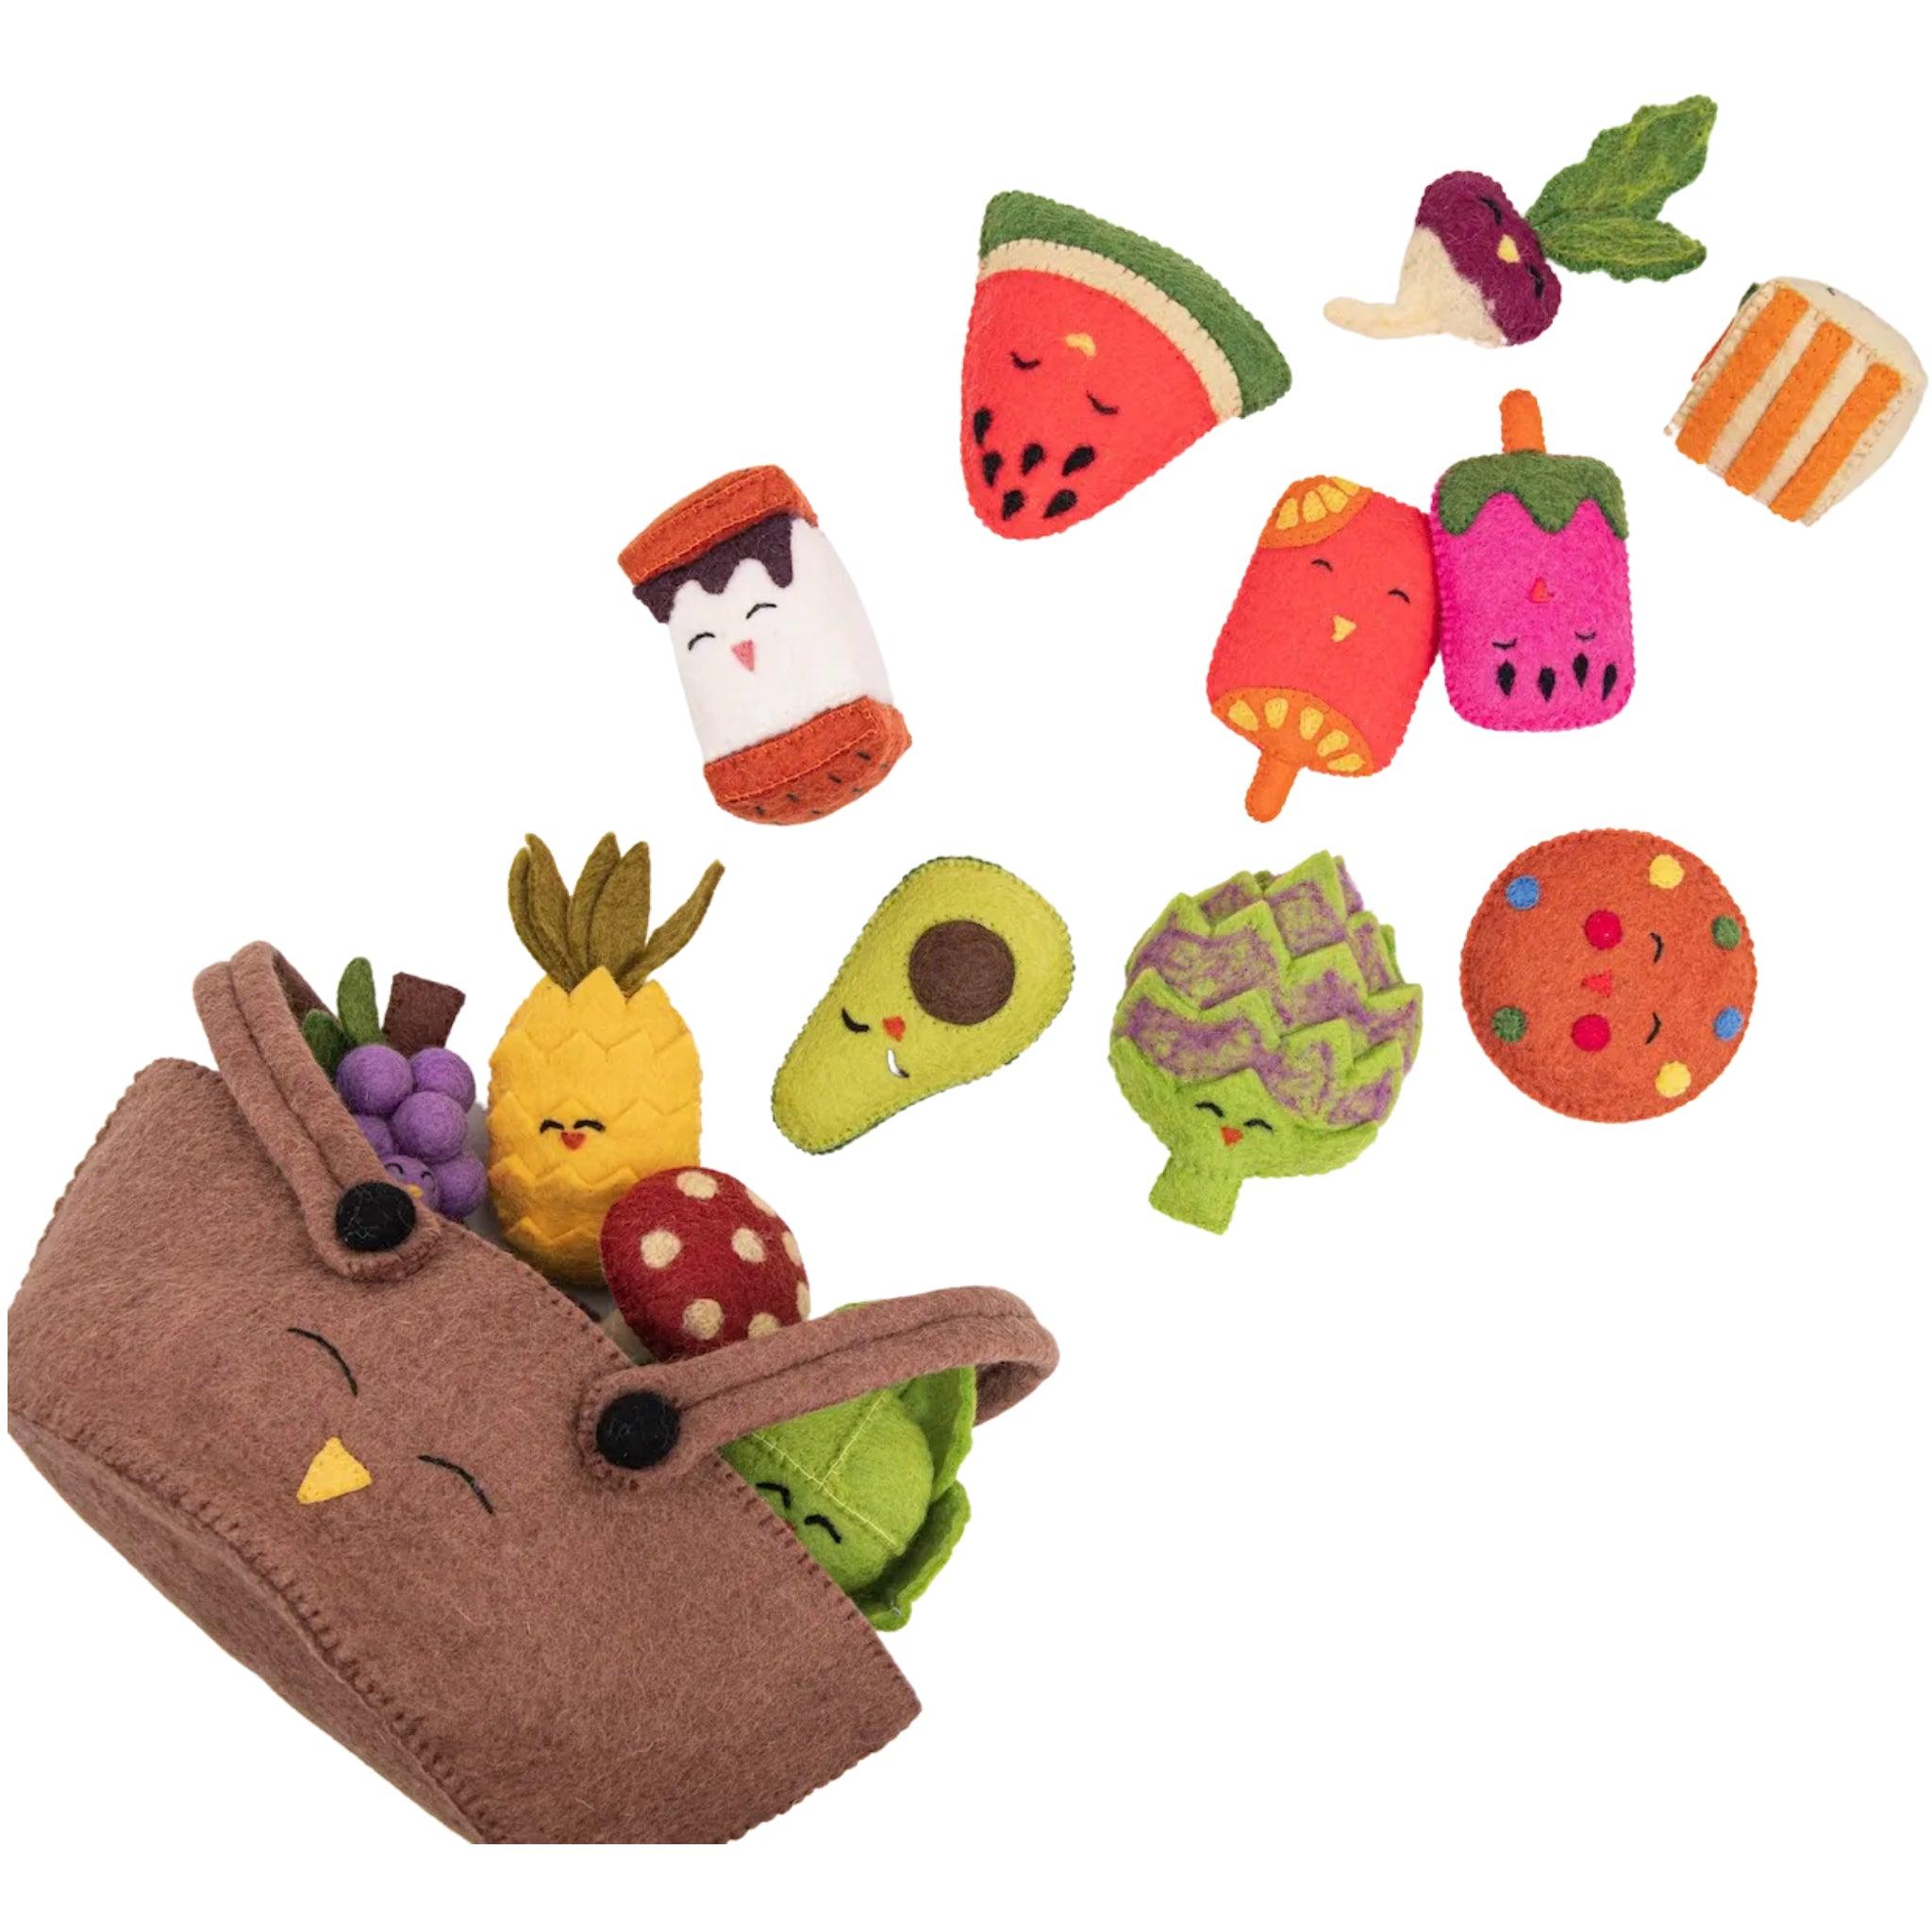 Felt Food Toys & Picnic Basket - Why and Whale